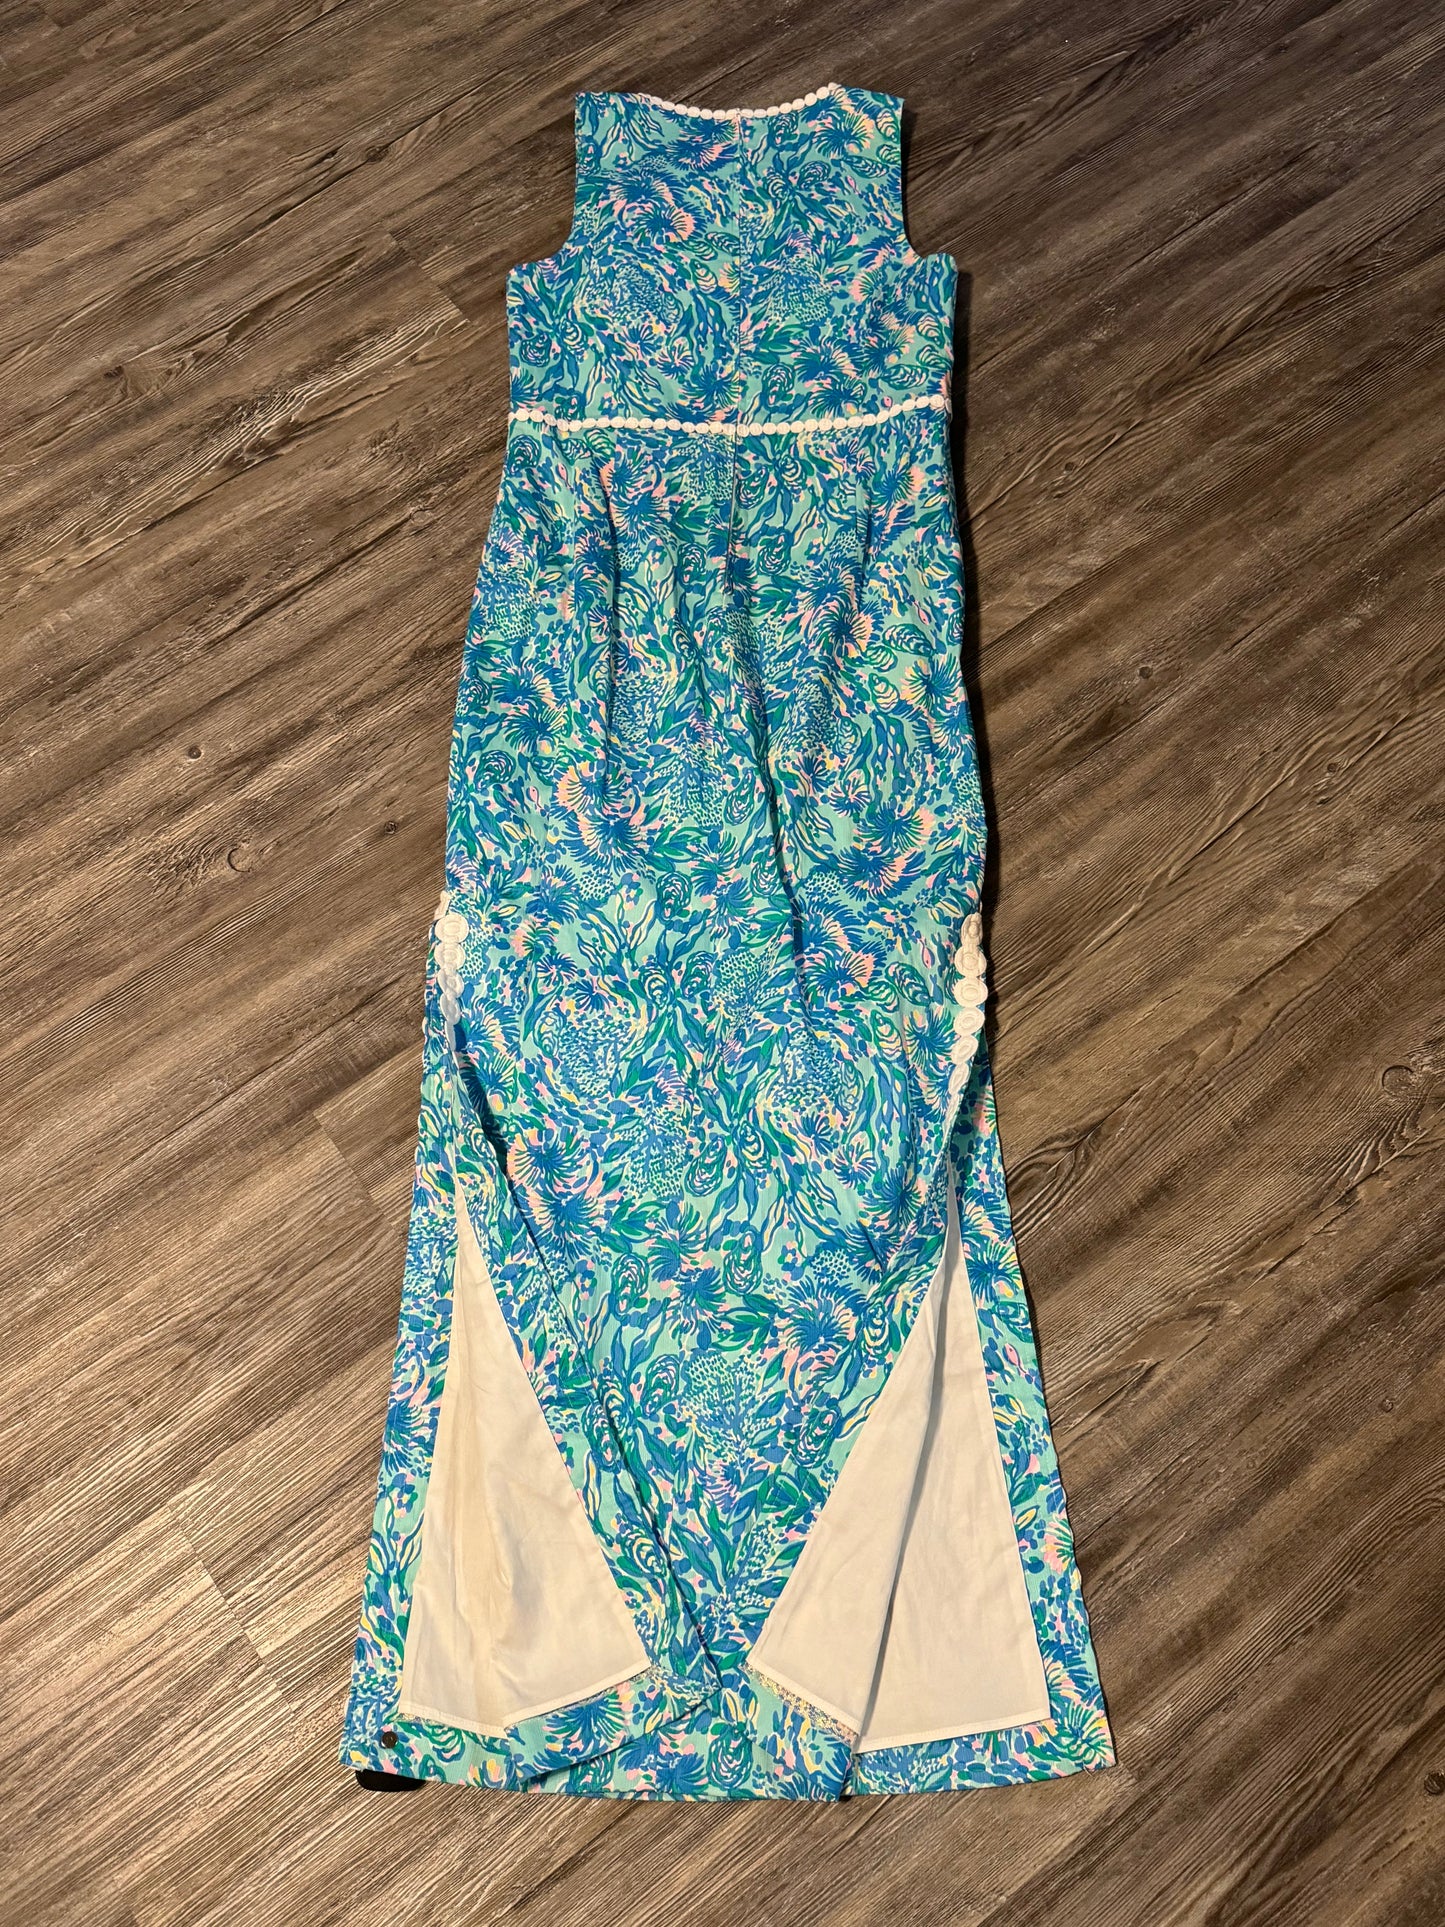 Dress Casual Maxi By Lilly Pulitzer  Size: 6